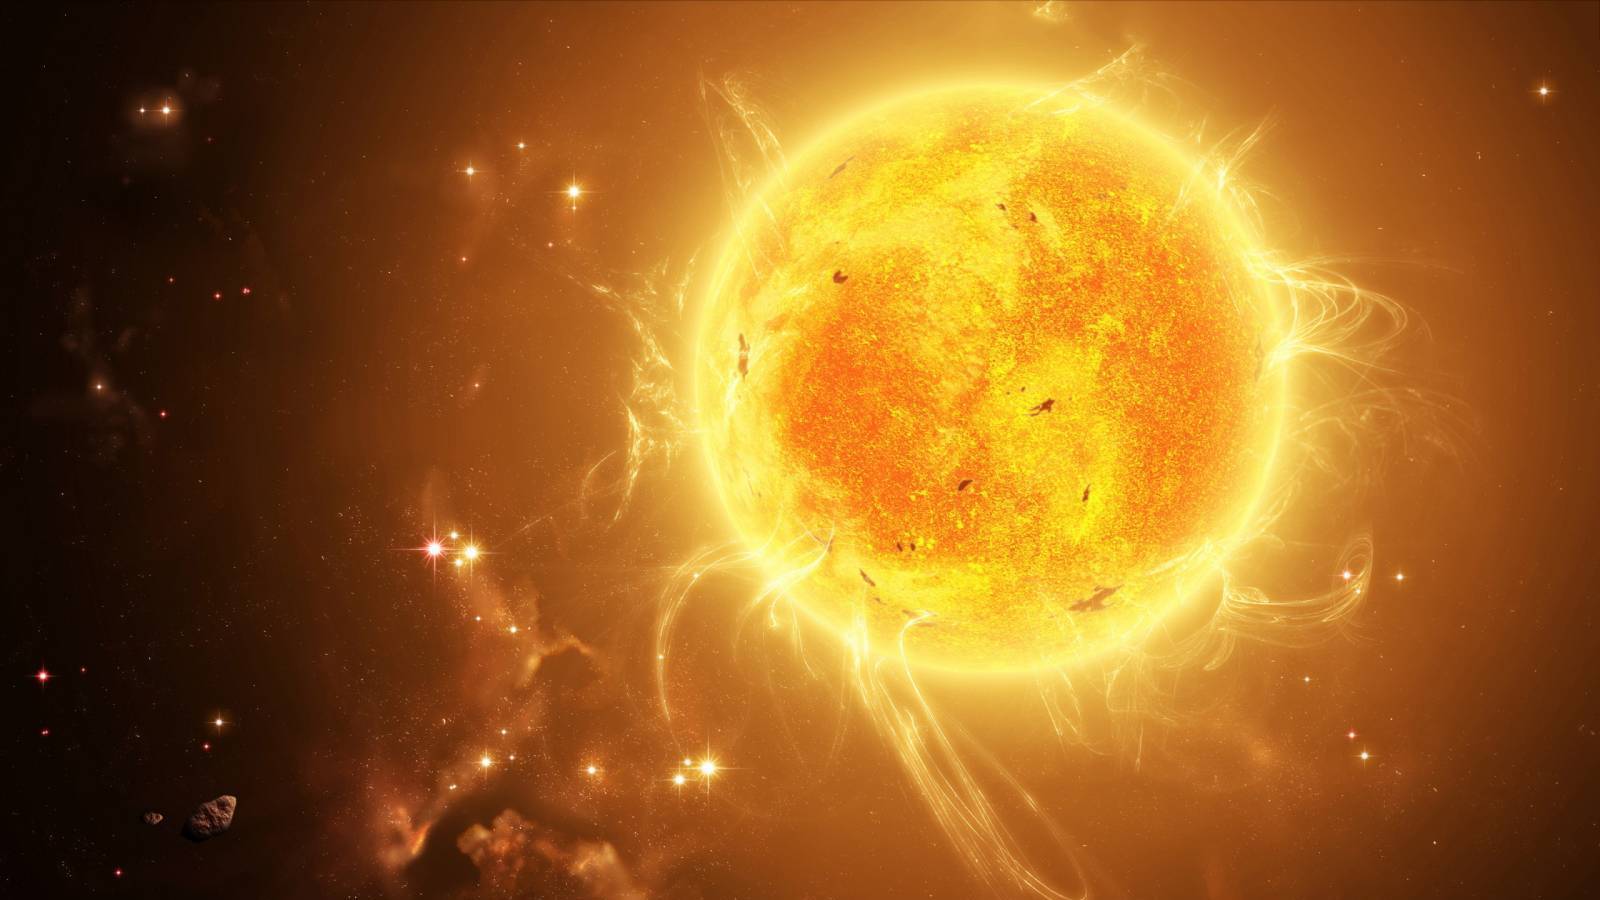 The sun reconnection